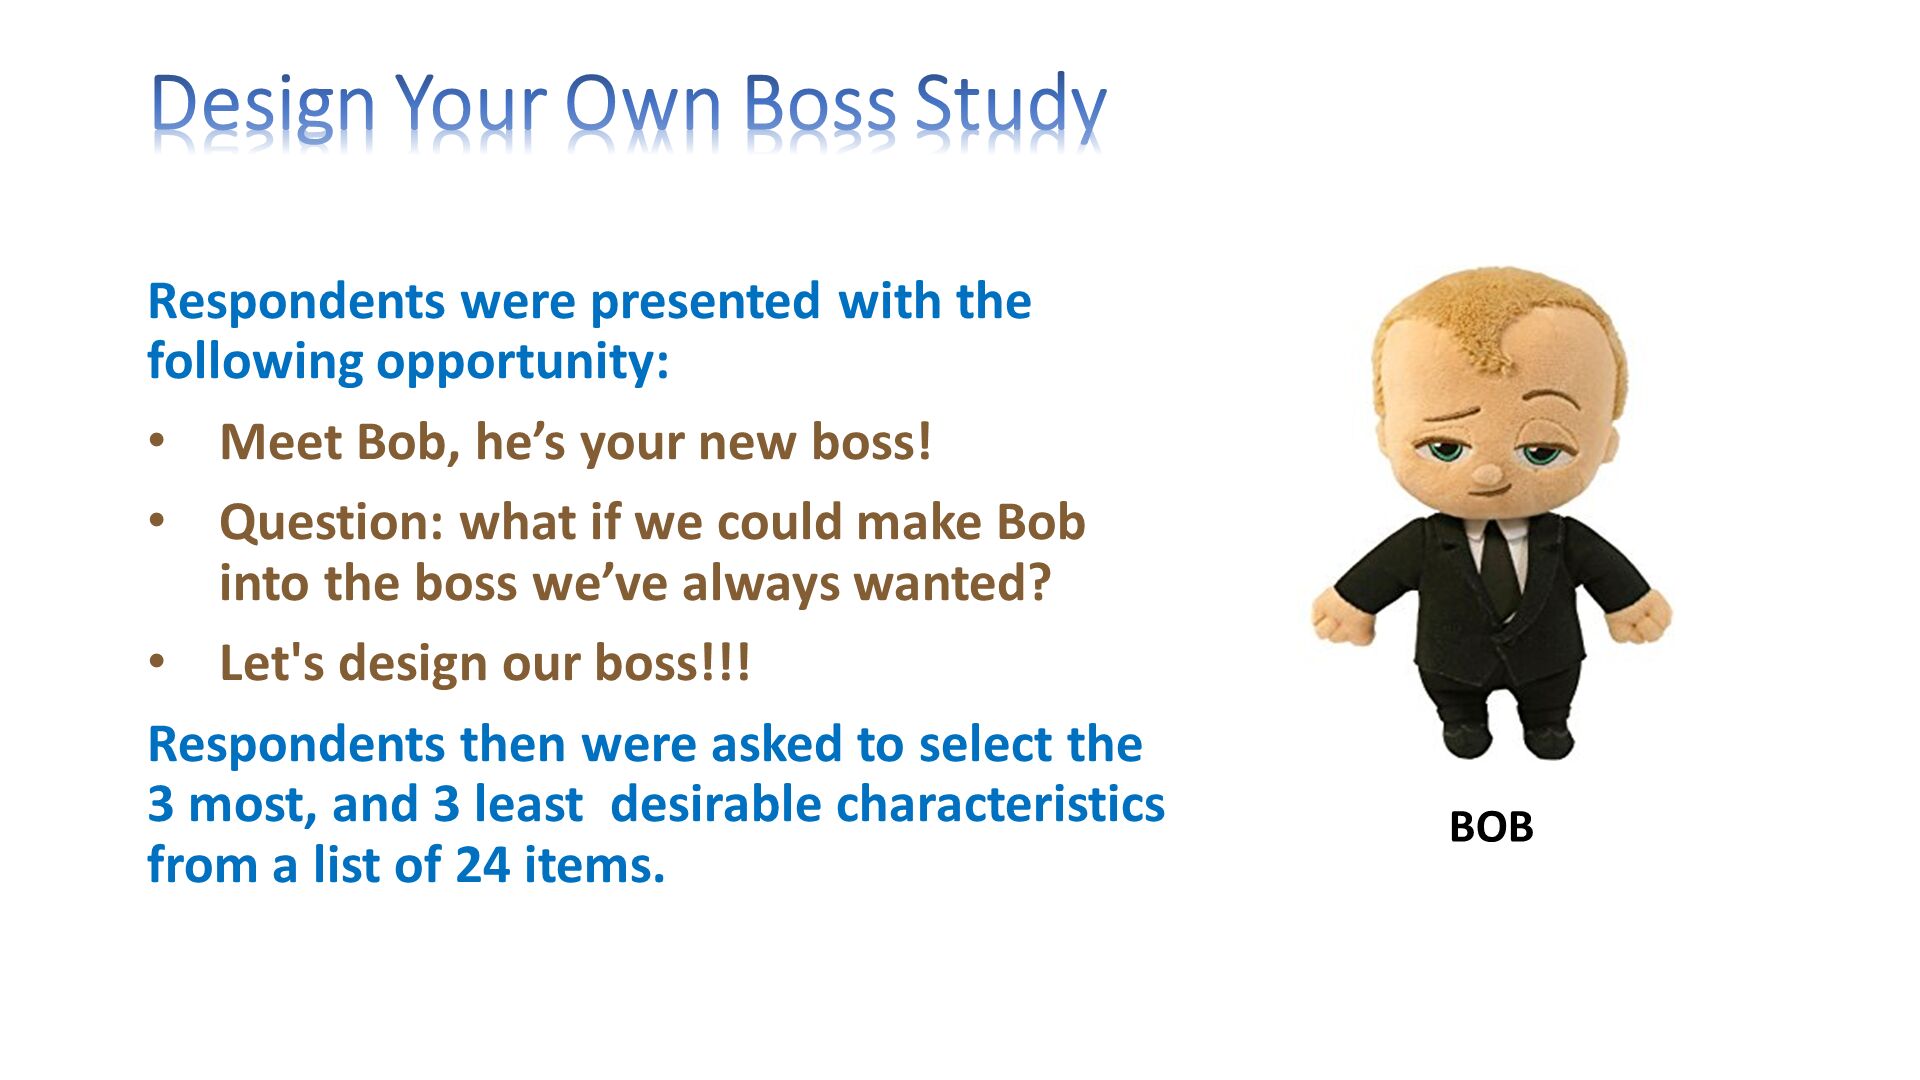 Design Your Own Boss Study. Respondents were presented with the following opportunity:
Meet Bob, he’s your new boss!
Question: what if we could make Bob into the boss we’ve always wanted?
Let's design our boss!!!
Respondents then were asked to select the 3 most, and 3 least  desirable characteristics from a list of 24 items.
. 